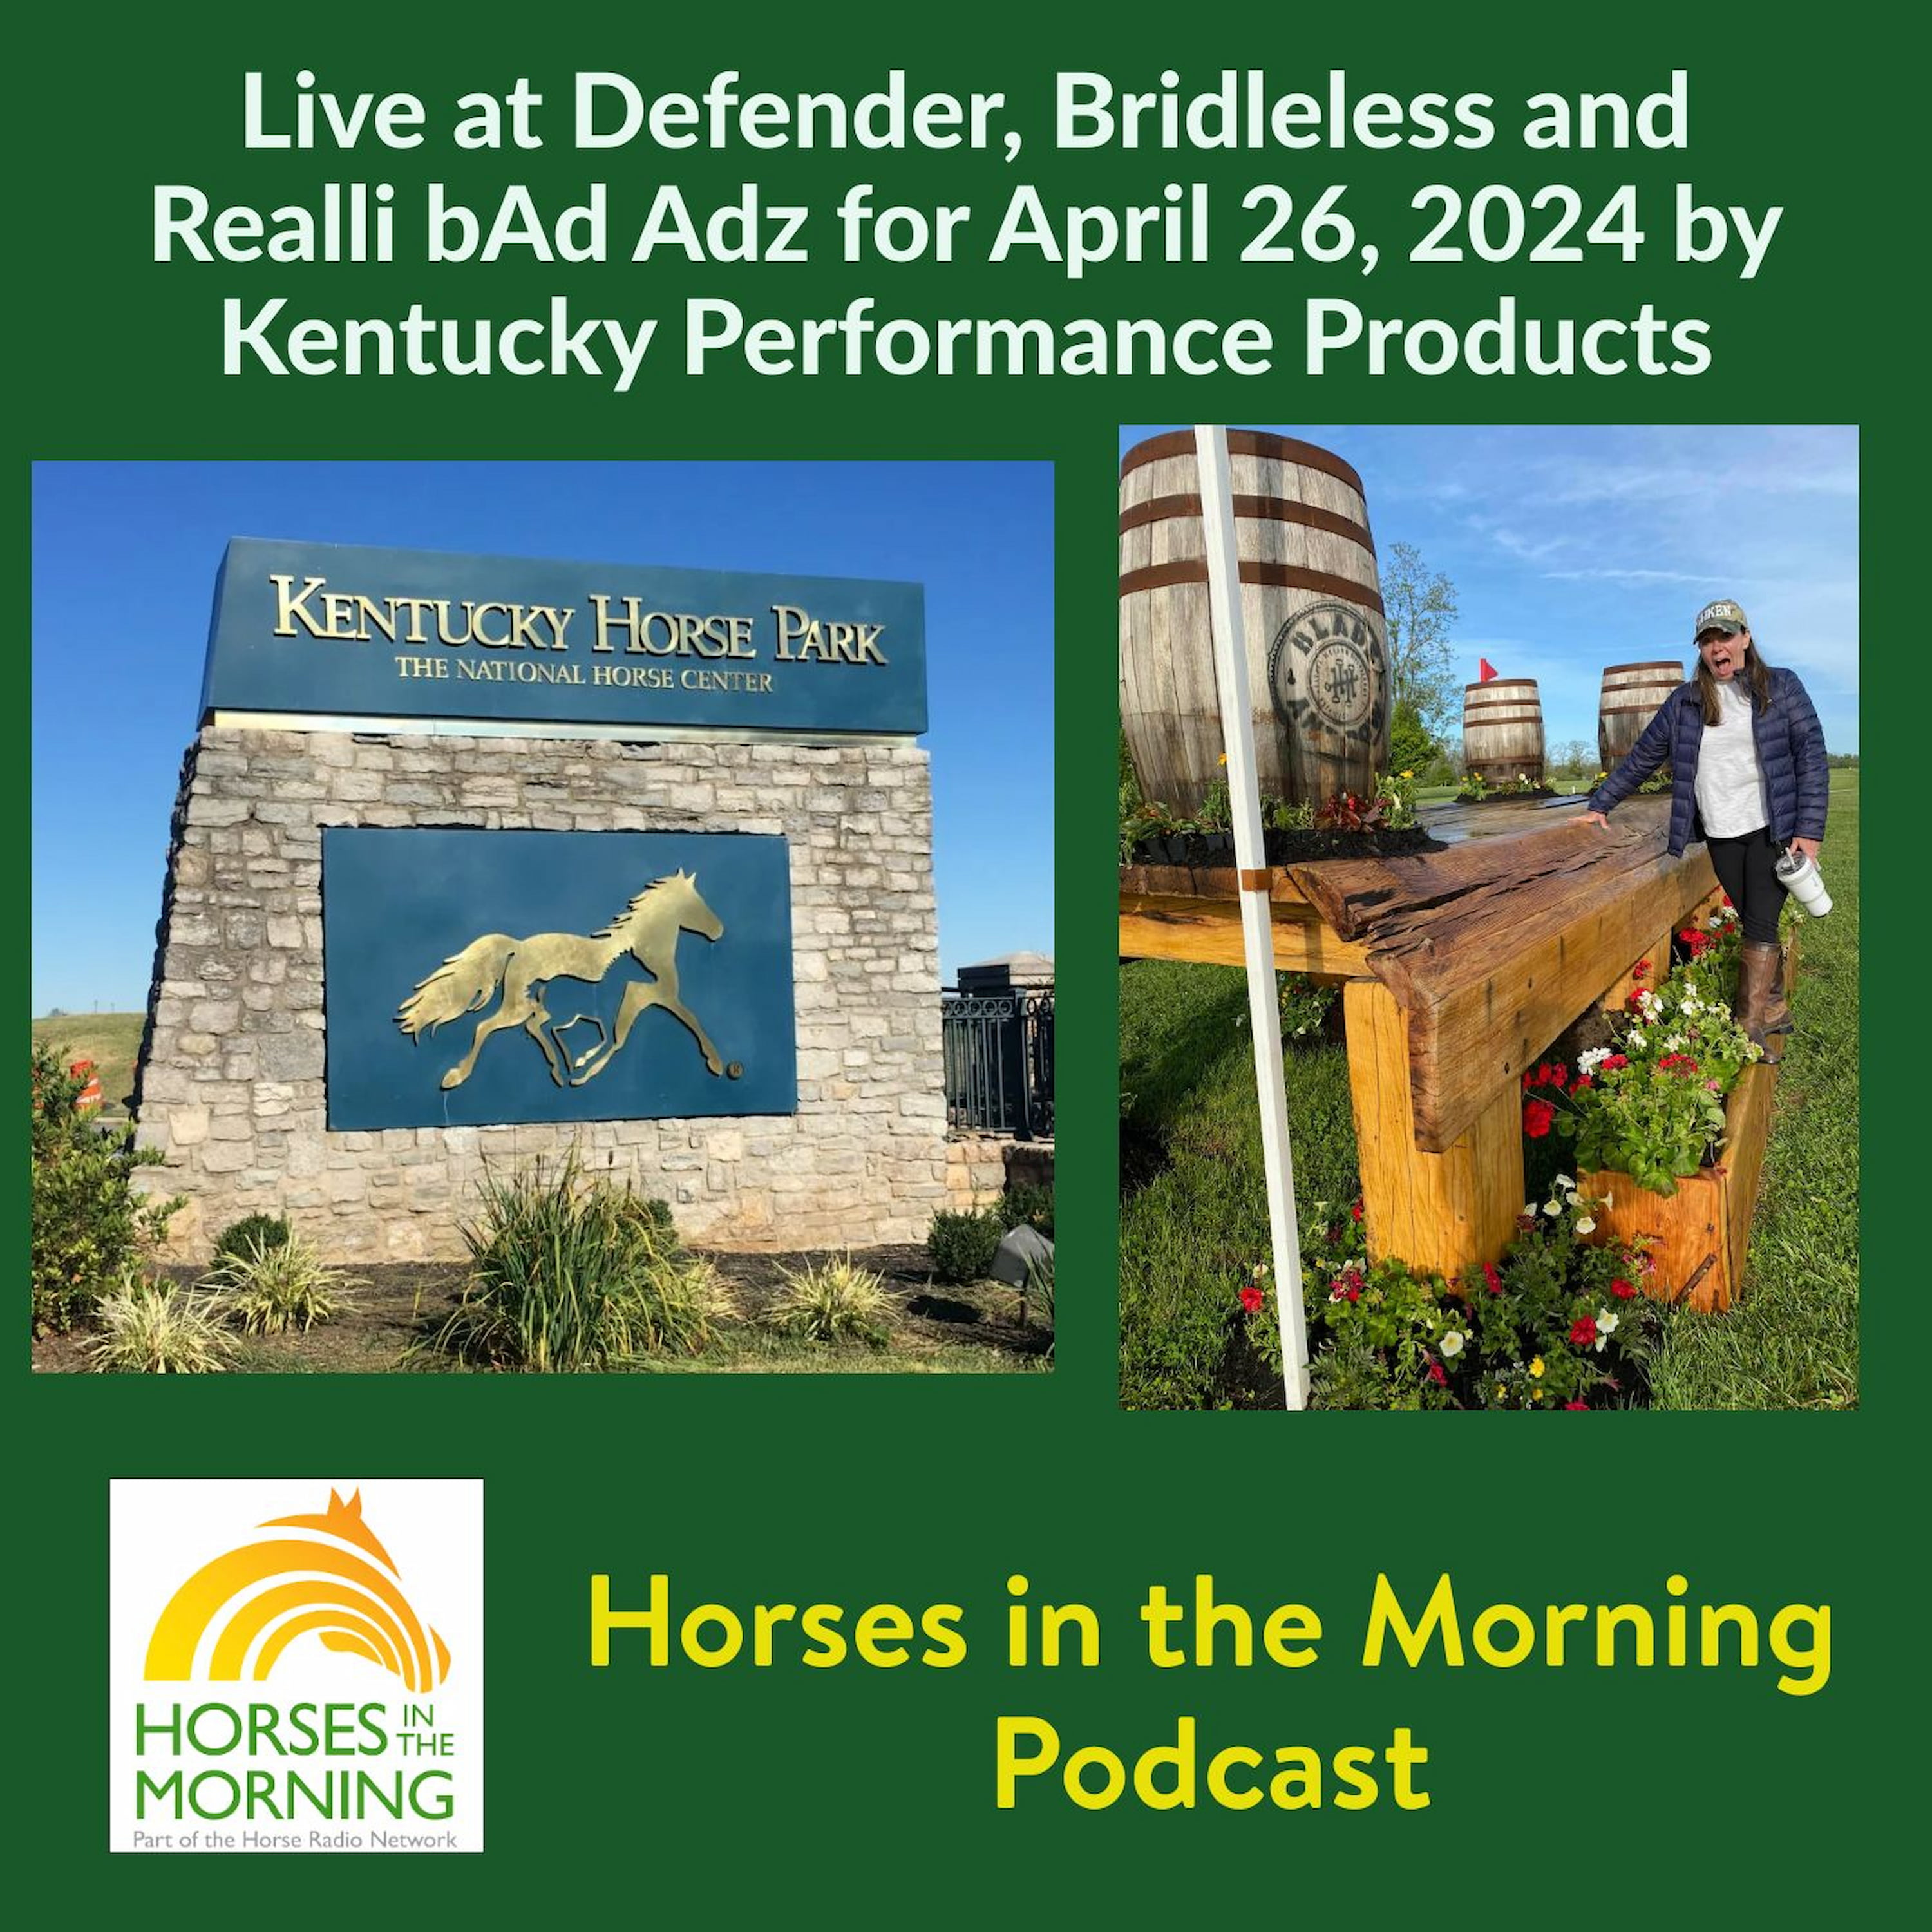 Live at Defender, Bridleless and Realli bAd Adz for April 26, 2024 by Kentucky Performance Products - HORSES IN THE MORNING